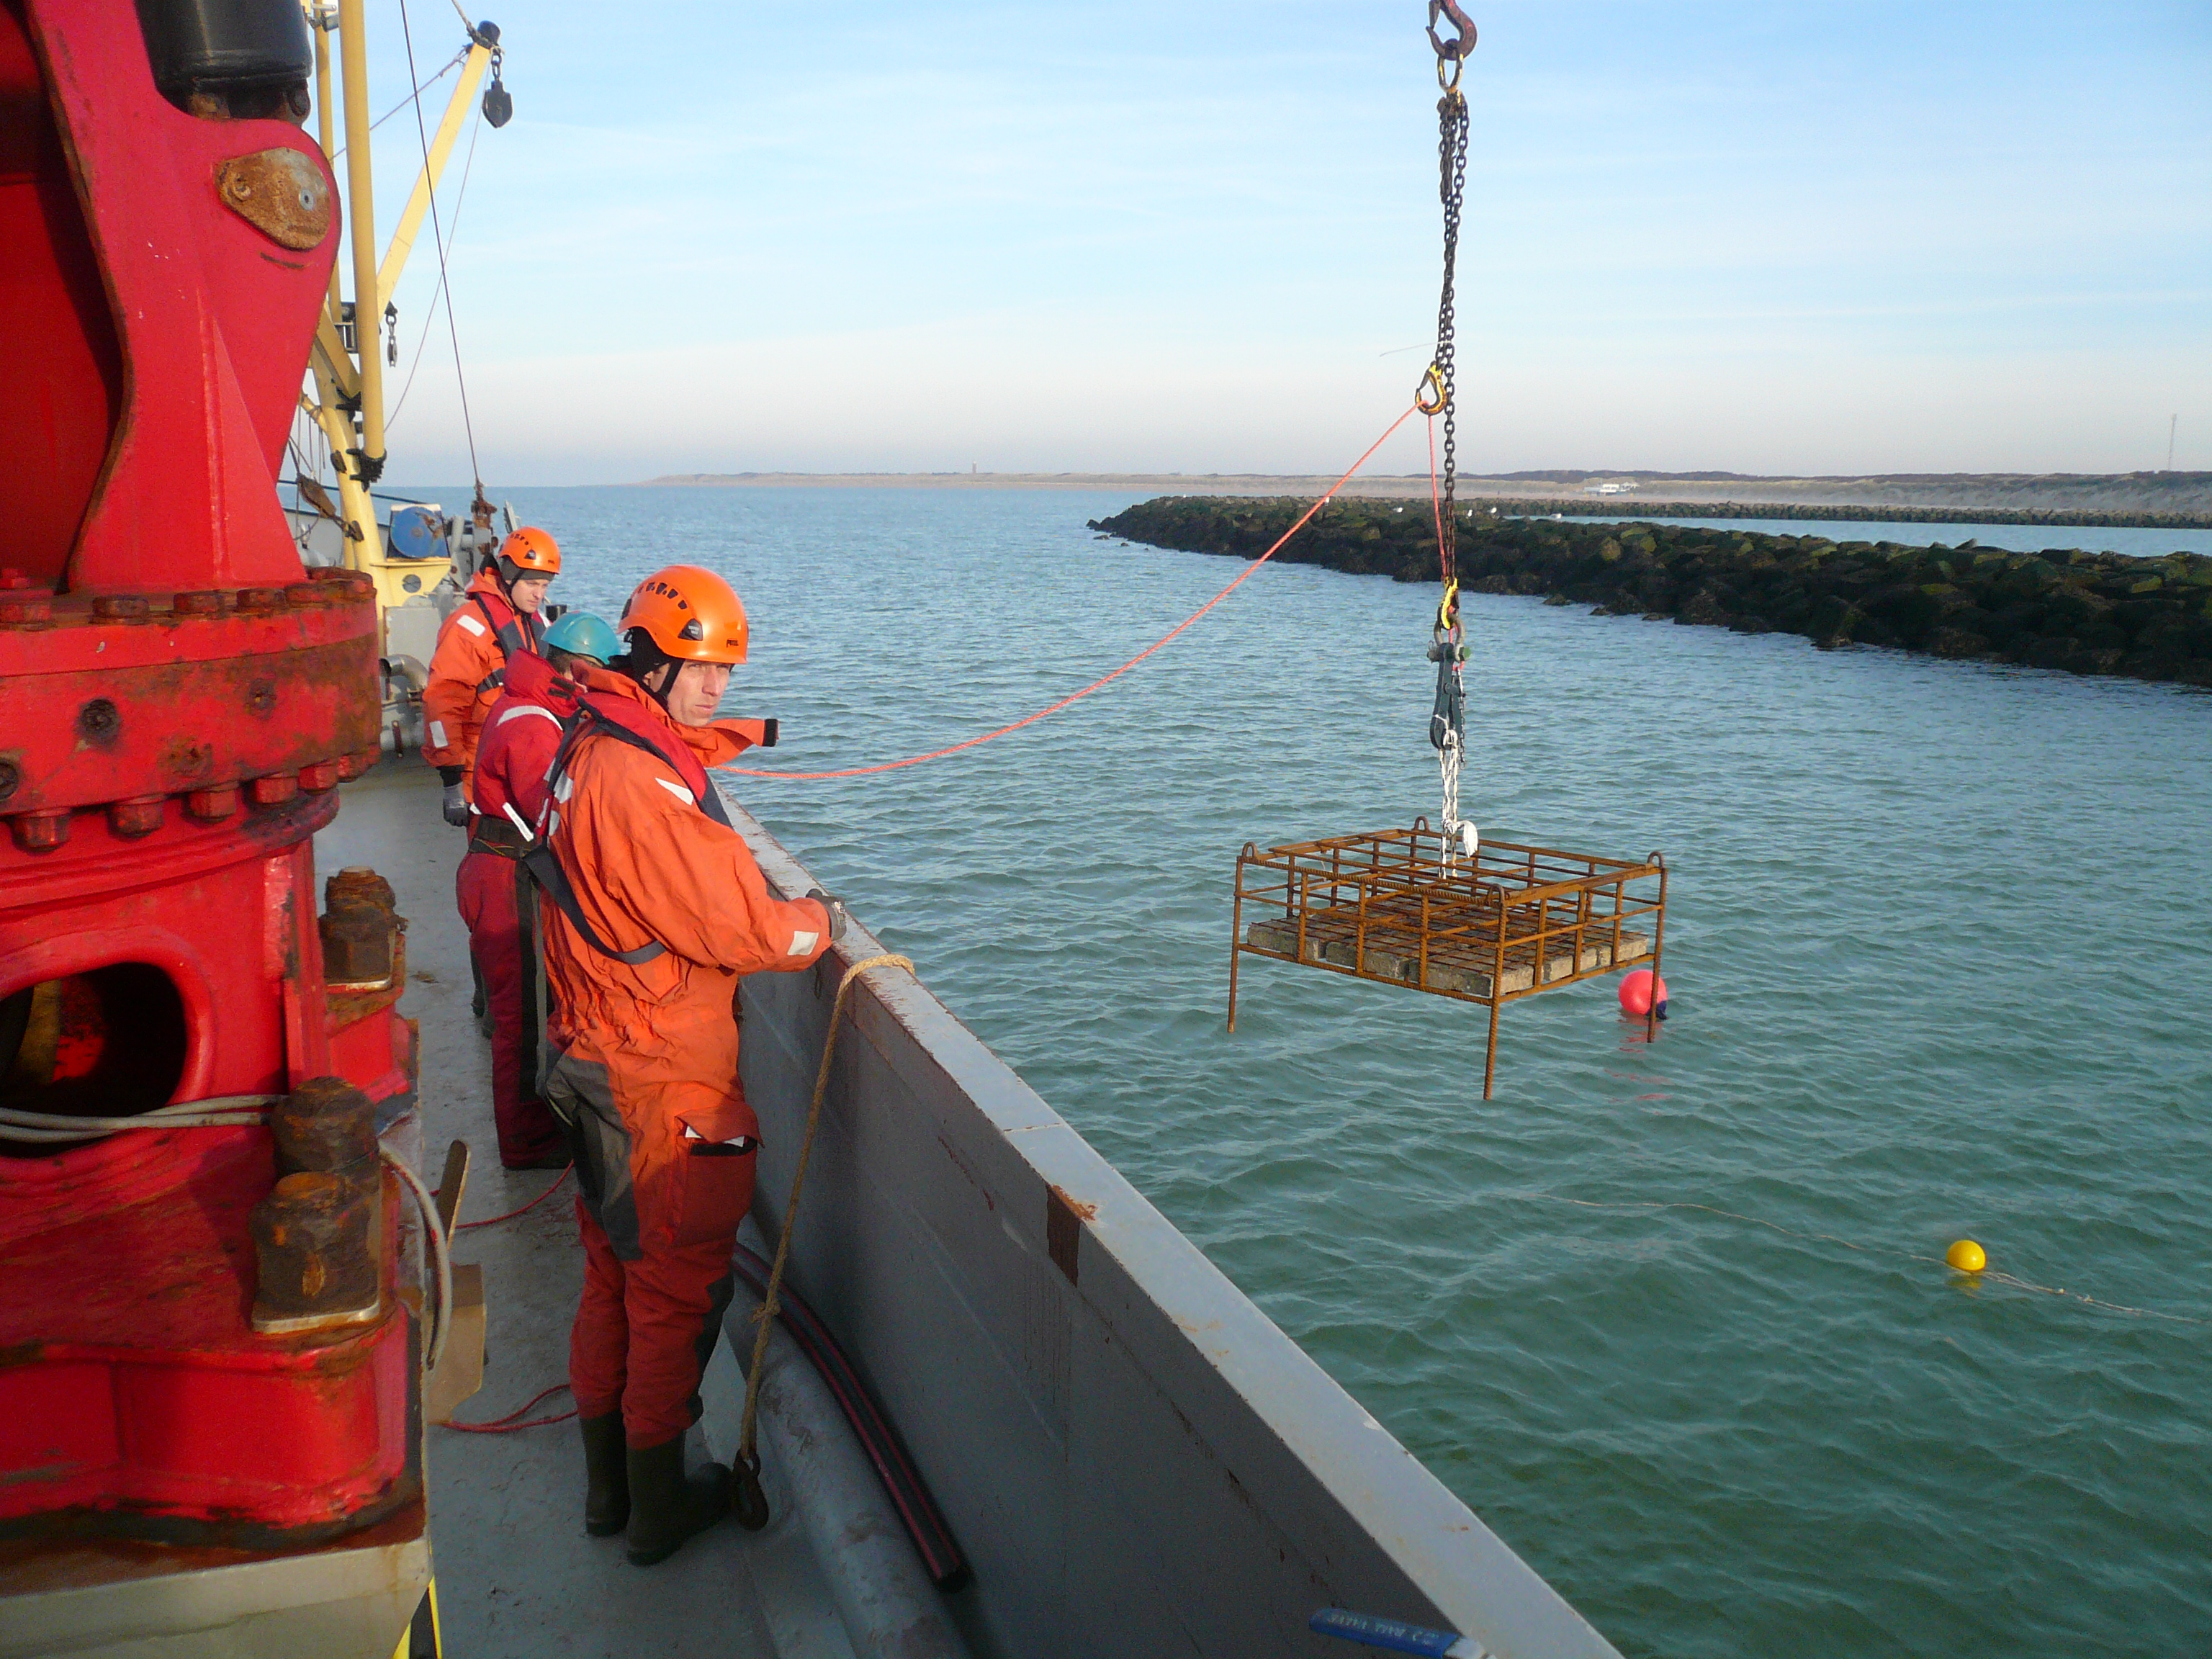 Restoration of European flat oyster reefs in the North Sea and Wadden Sea